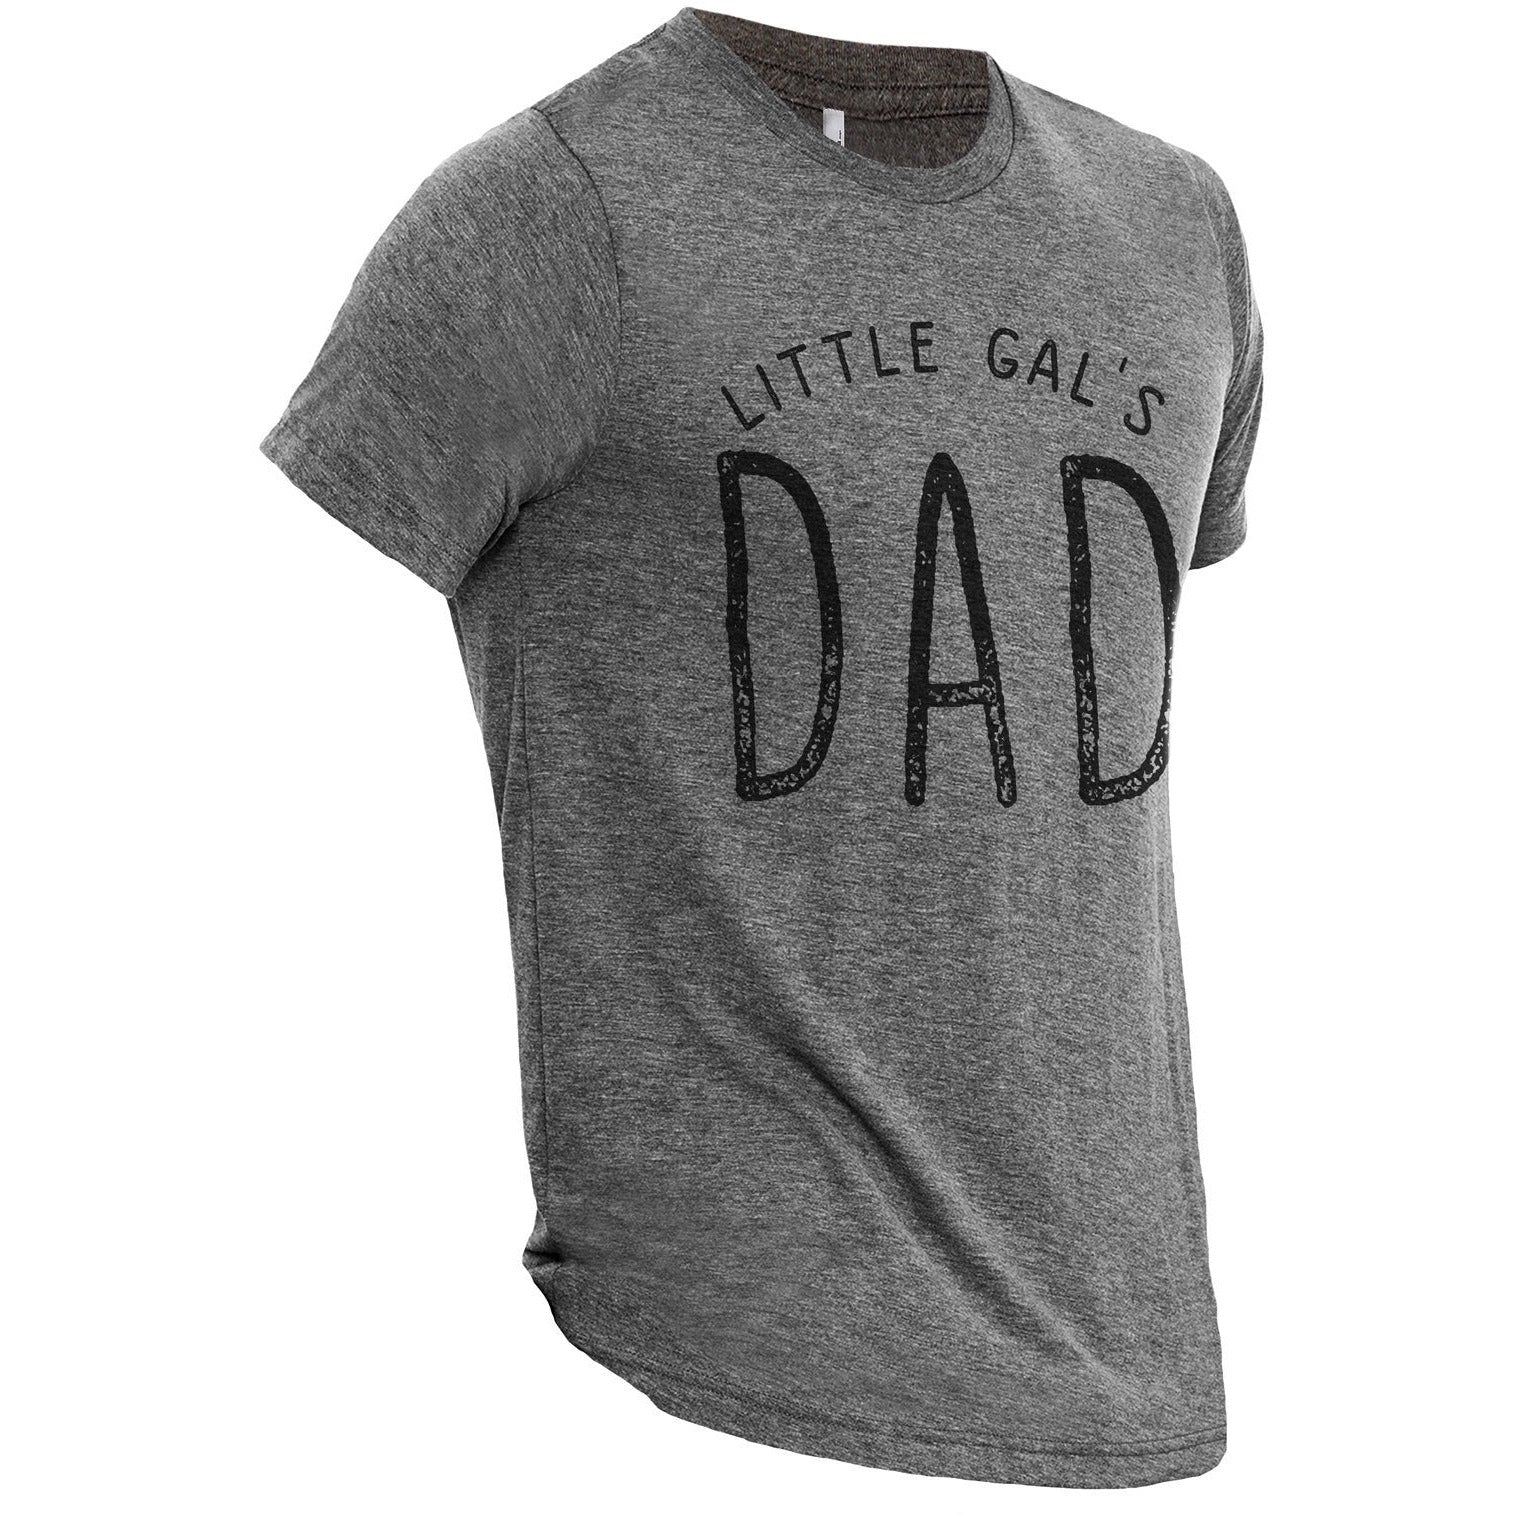 Lil Gal's Dad Heather Grey Printed Graphic Men's Crew T-Shirt Tee